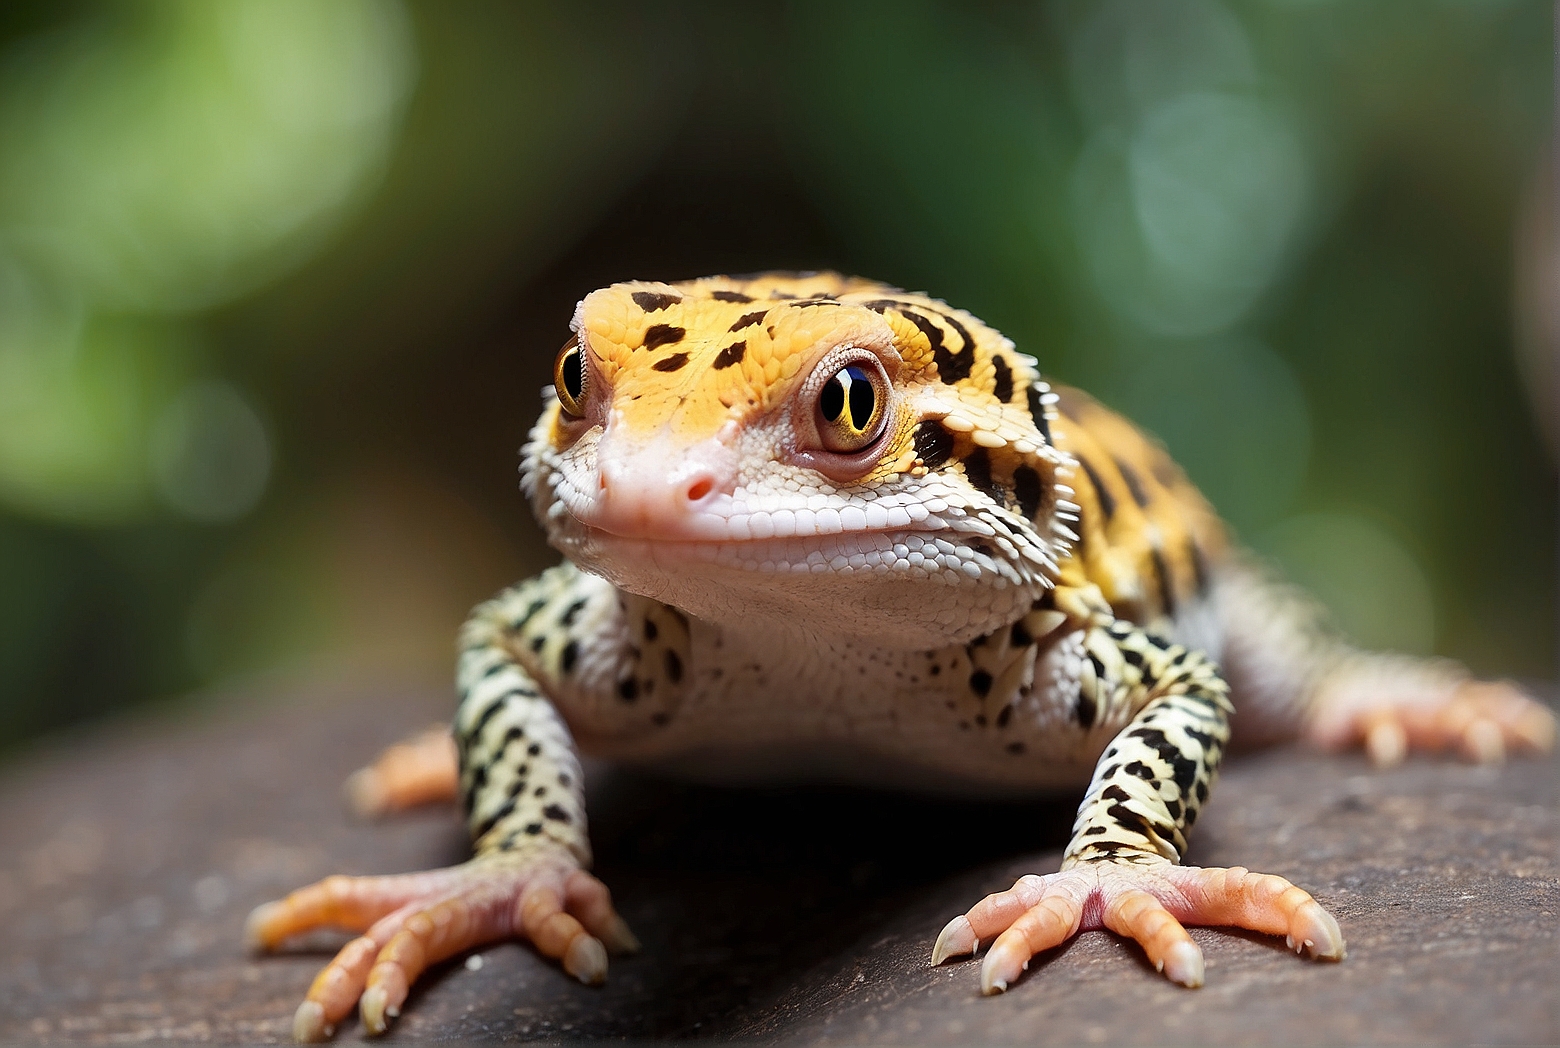 Are Leopard Geckos Good Pets For Beginners?